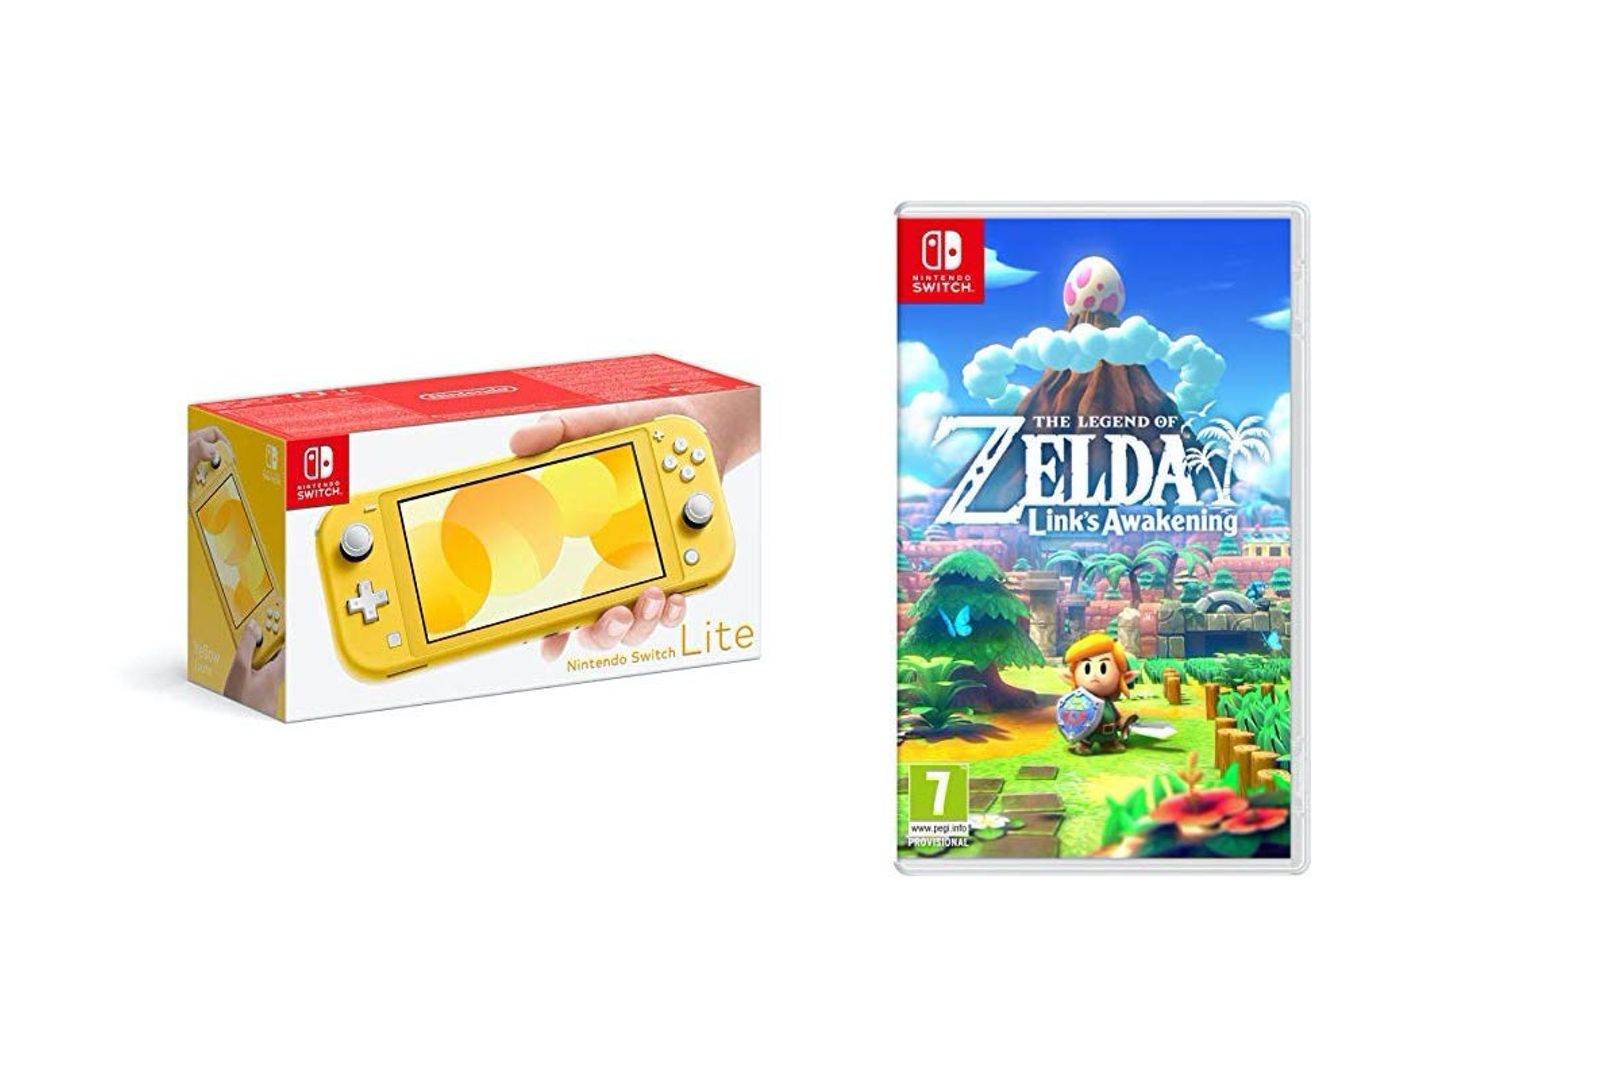 The Best Nintendo Switch Bundles For 2020 Deals To Help You Play With Mario Et Al image 5